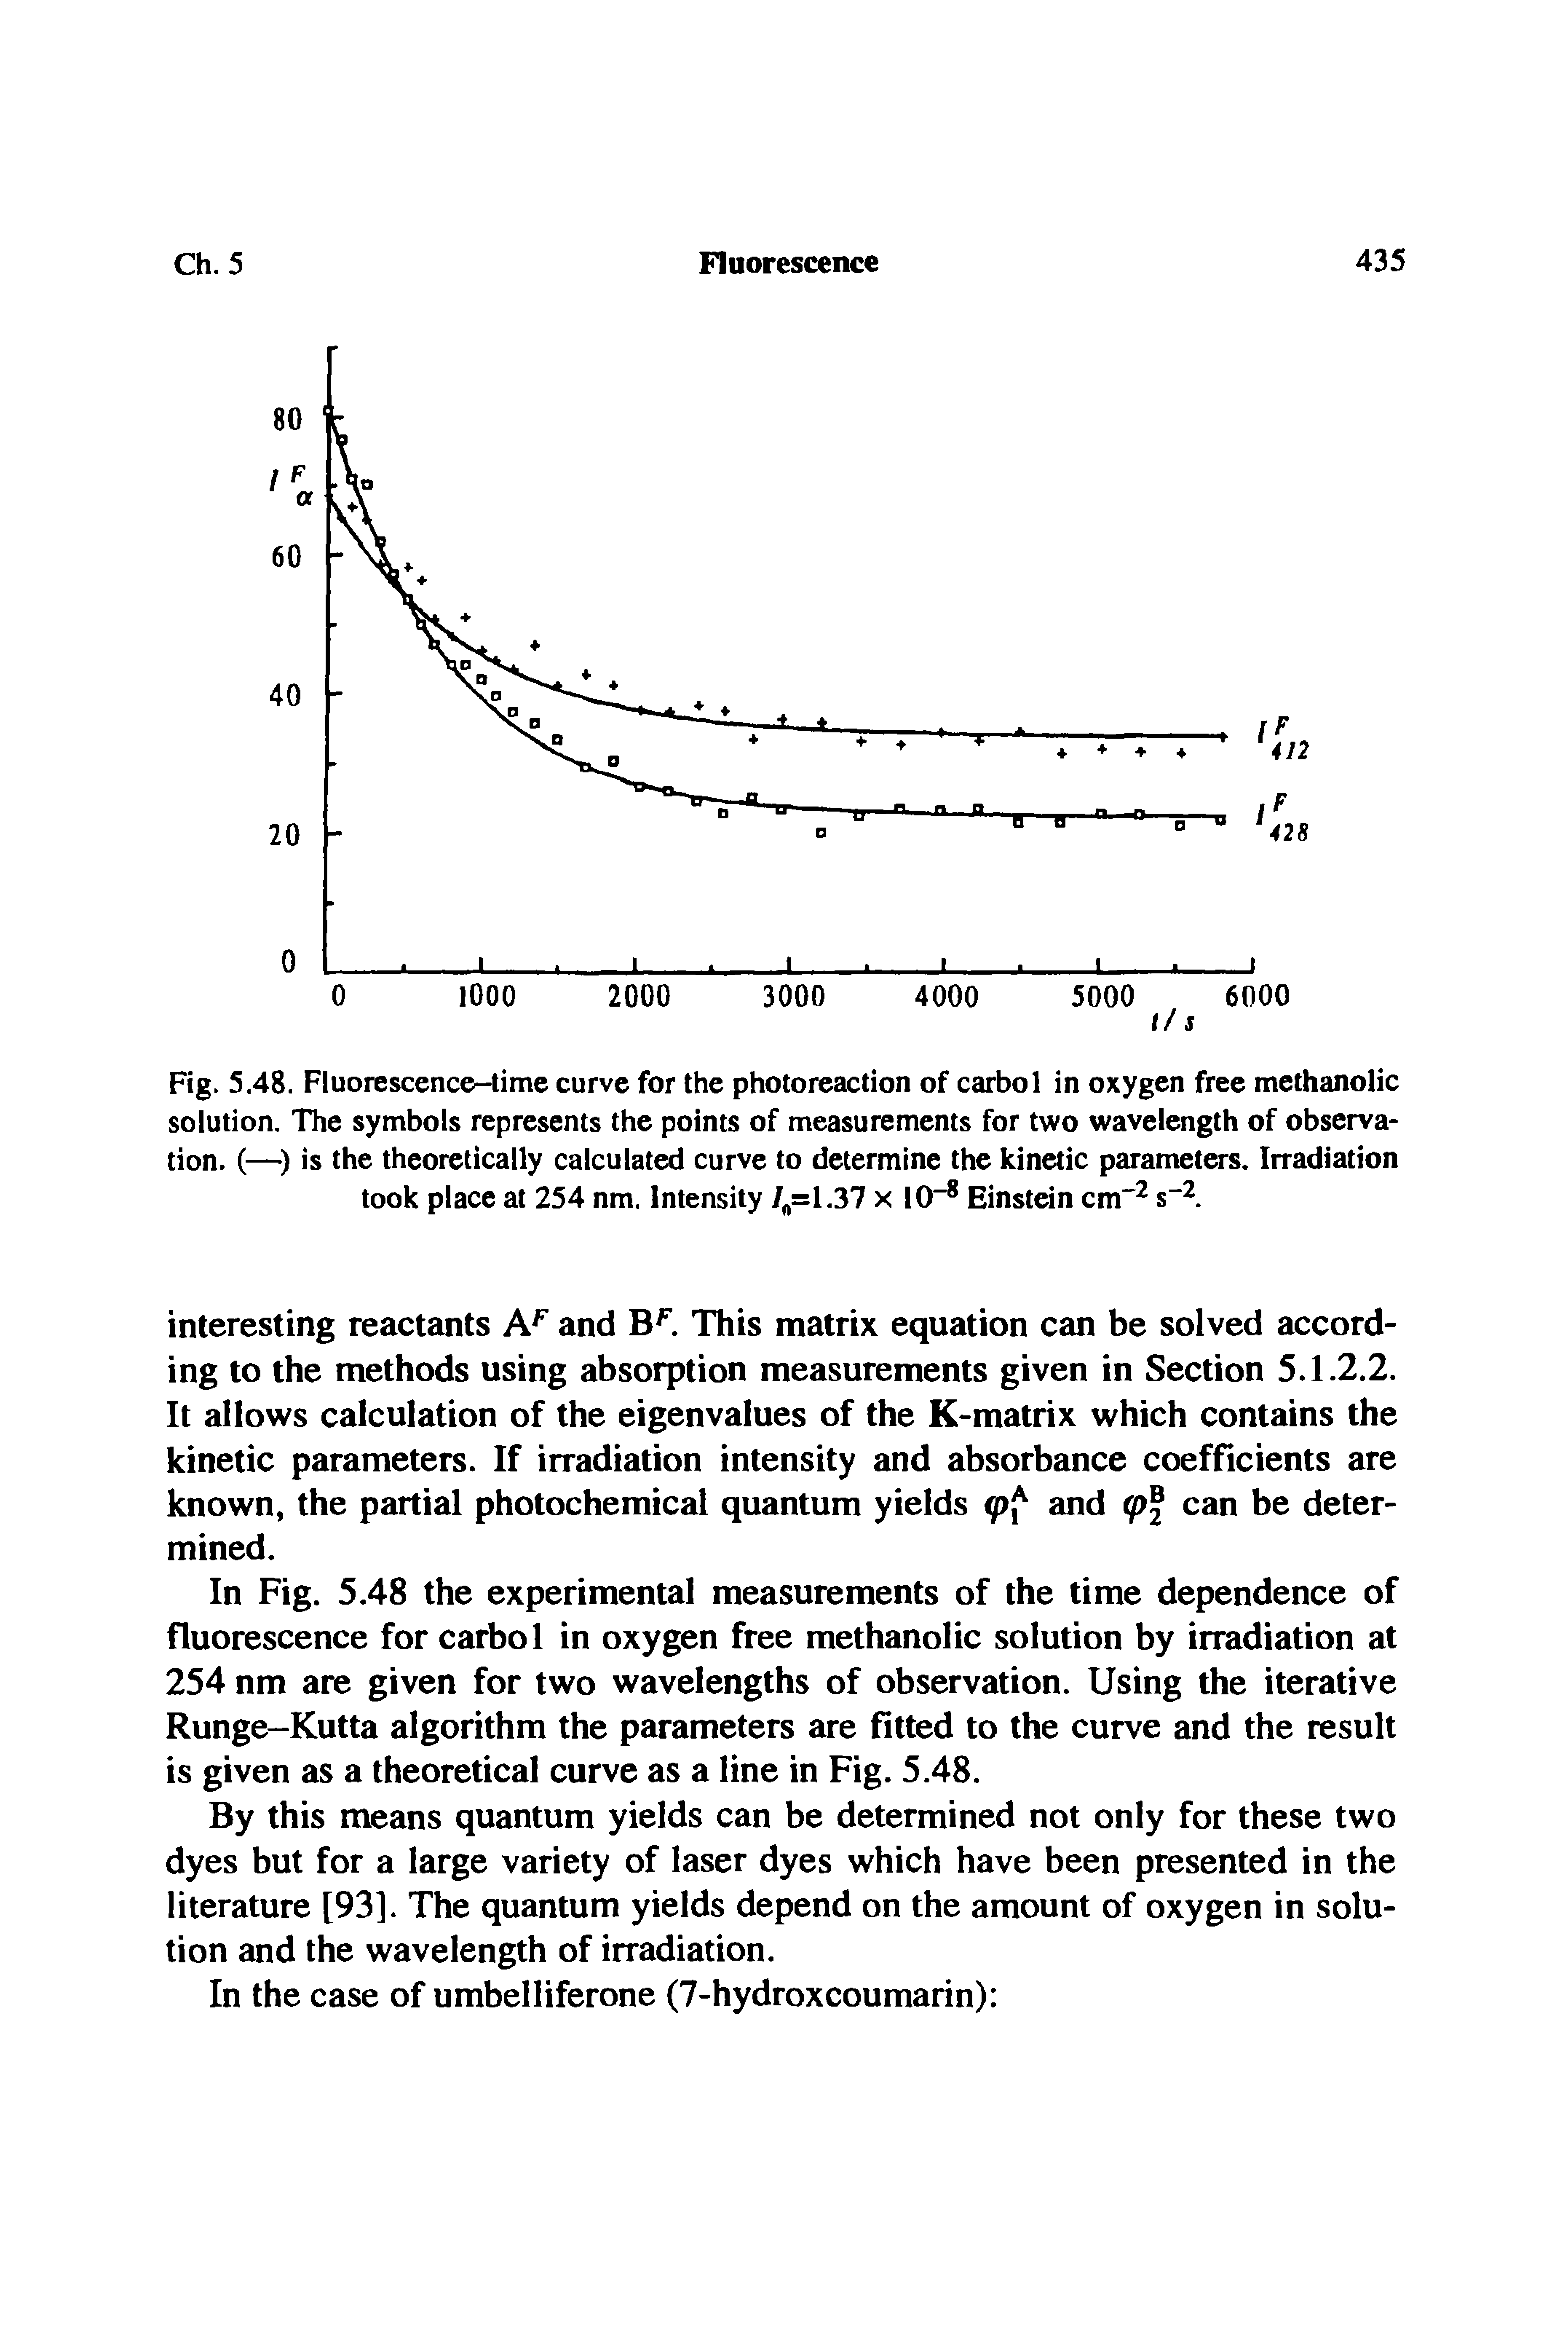 Fig. 5.48. Fluorescence-time curve for the photoreaction of carbol in oxygen free methanolic solution. The symbols represents the points of measurements for two wavelength of observation. (—) is the theoretically calculated curve to determine the kinetic parameters. Irradiation took place at 254 nm. Intensity /rt=1.37 x I0 Einstein cm" s ...